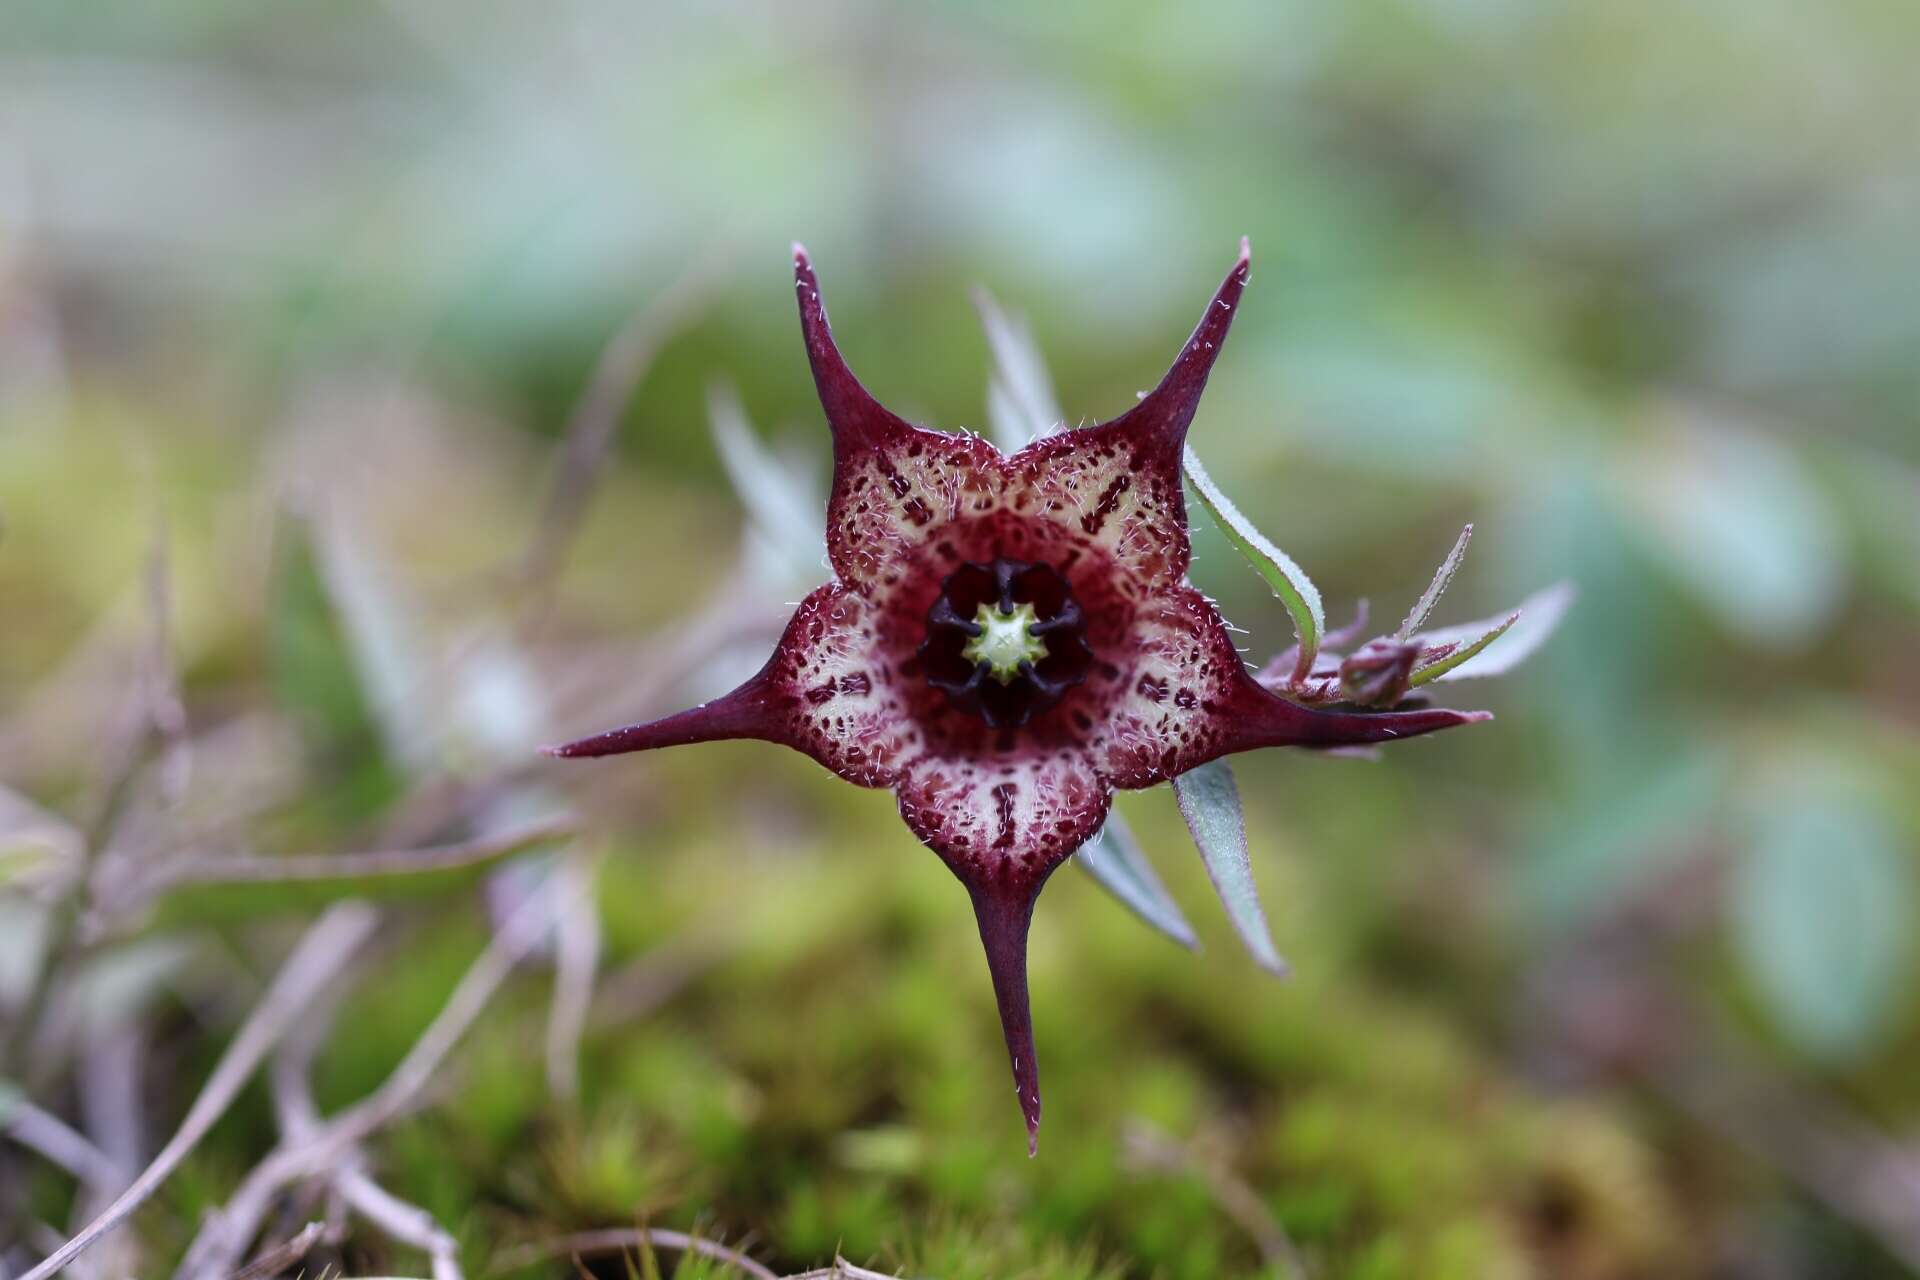 Image of Ceropegia australis (R. A. Dyer) Bruyns